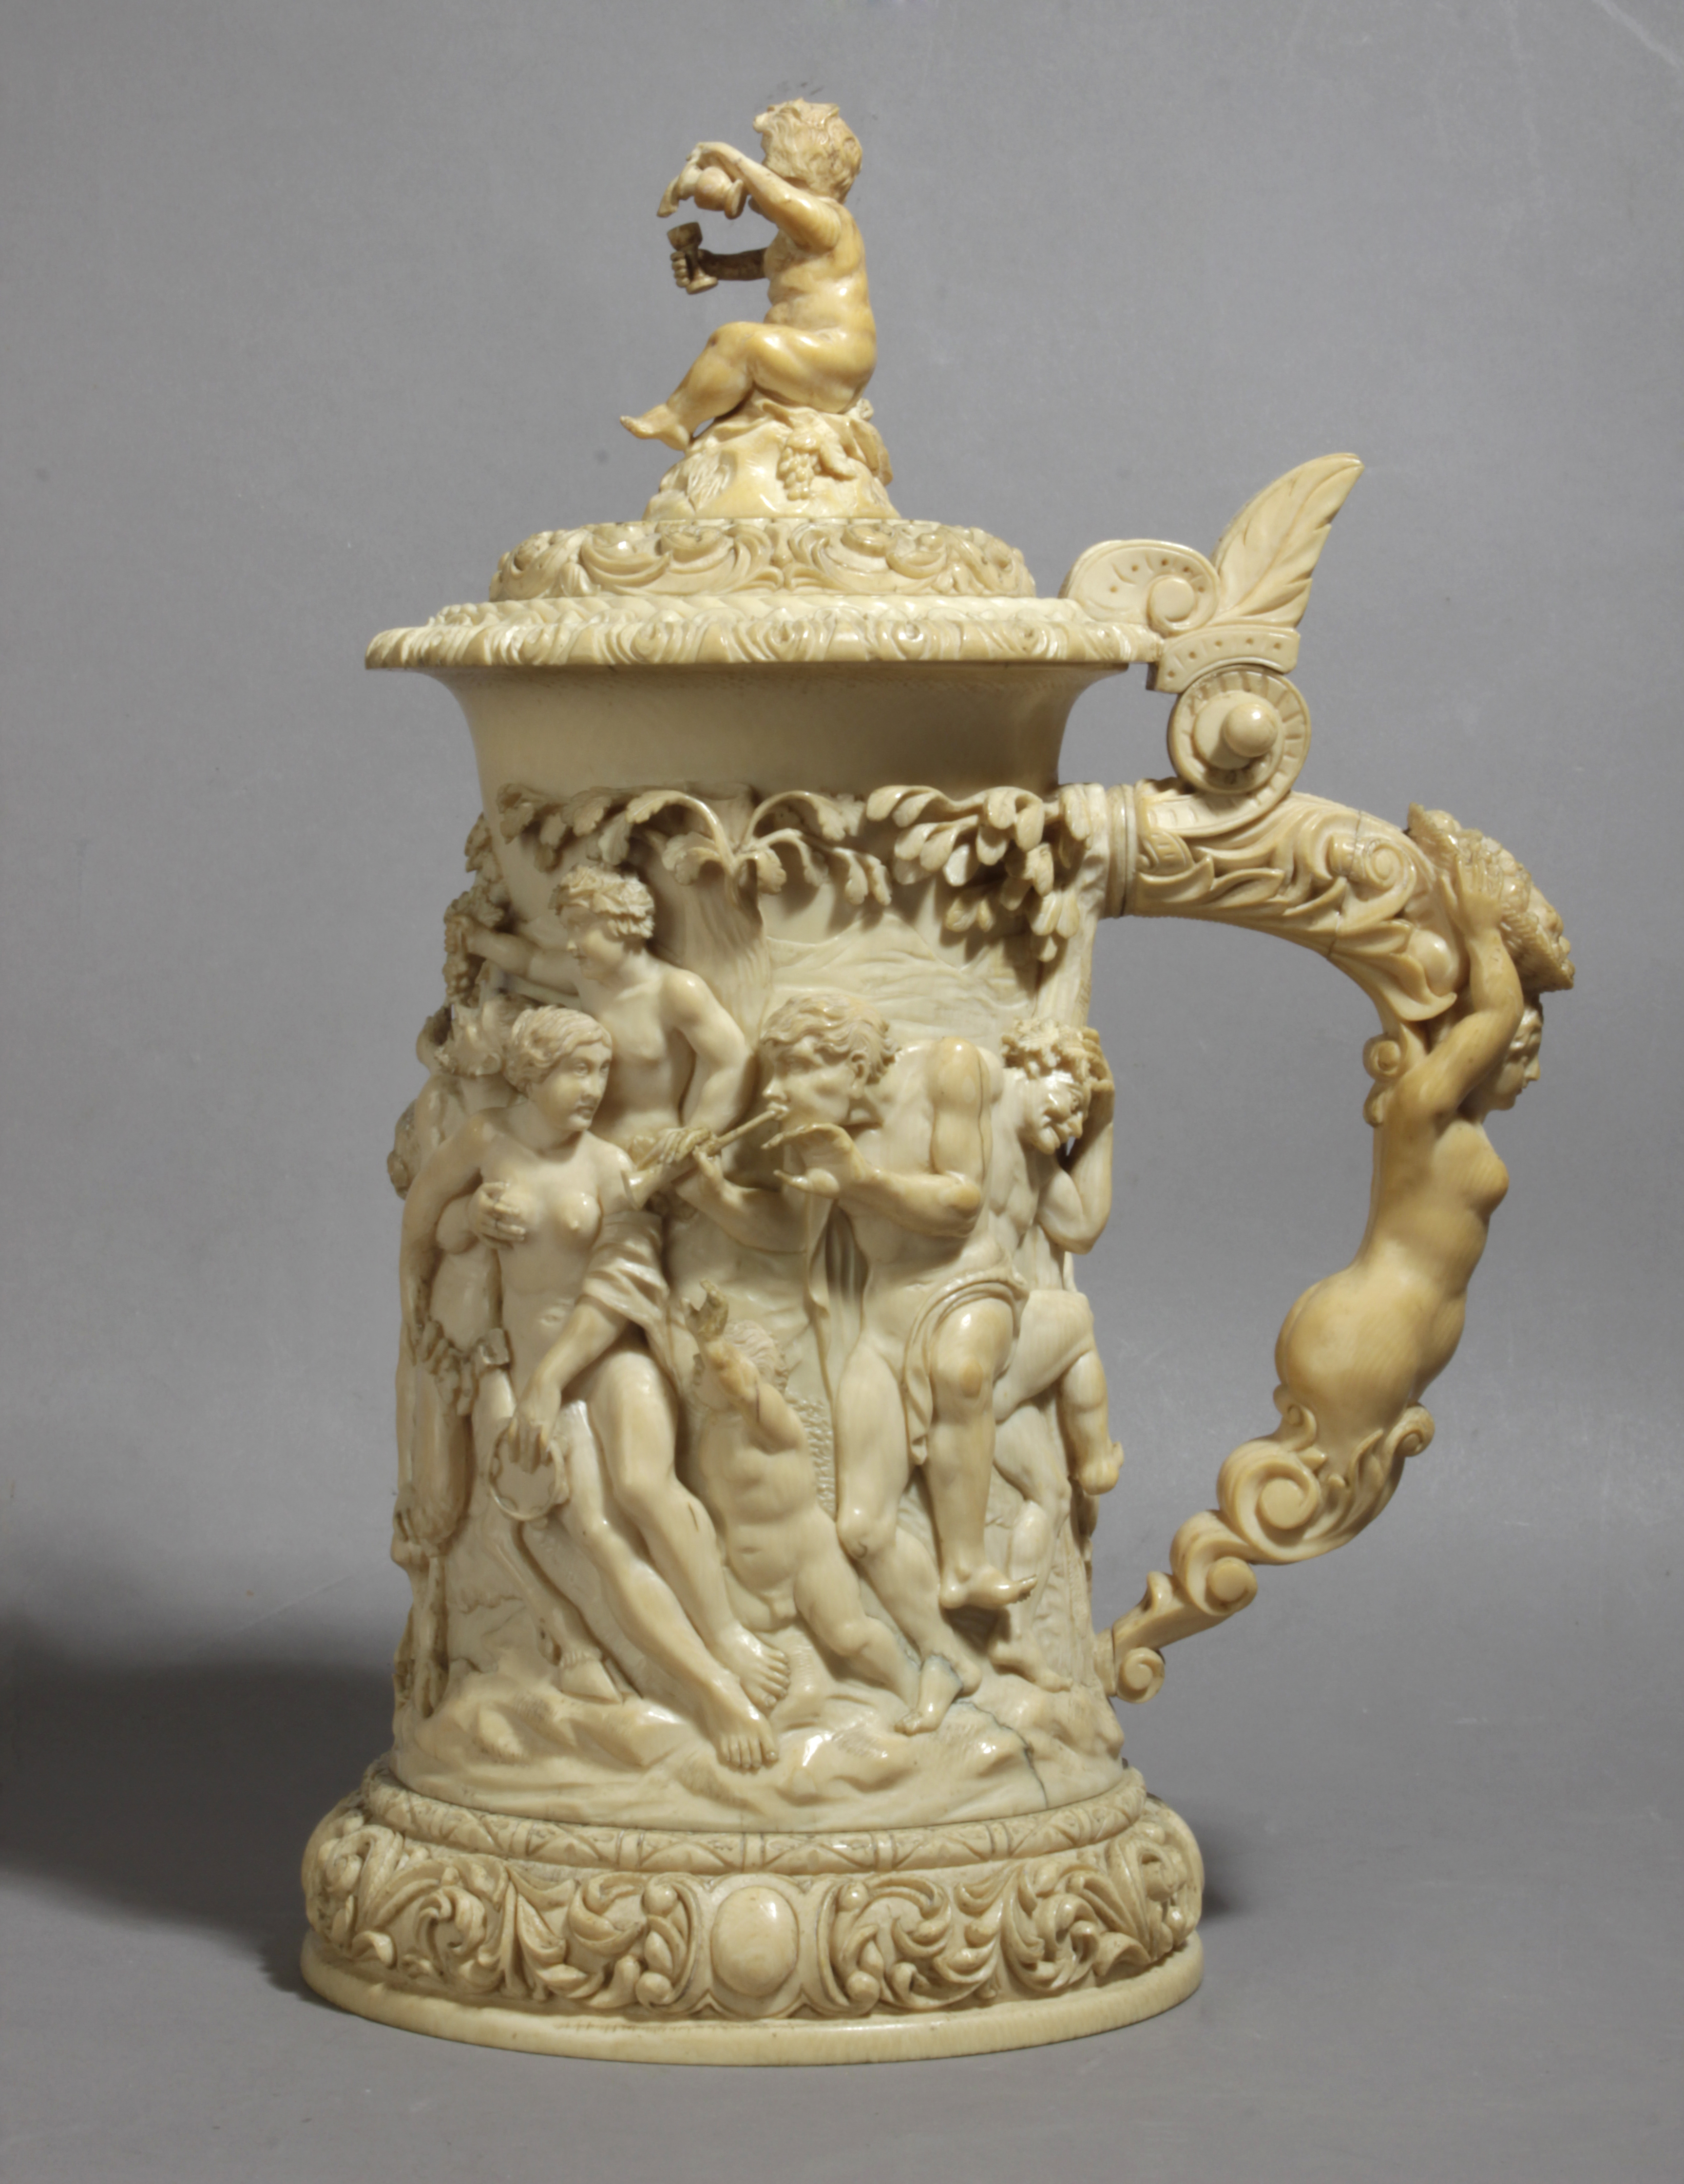 A 19th century German tankard in carved ivory depicting a Bacchanalia